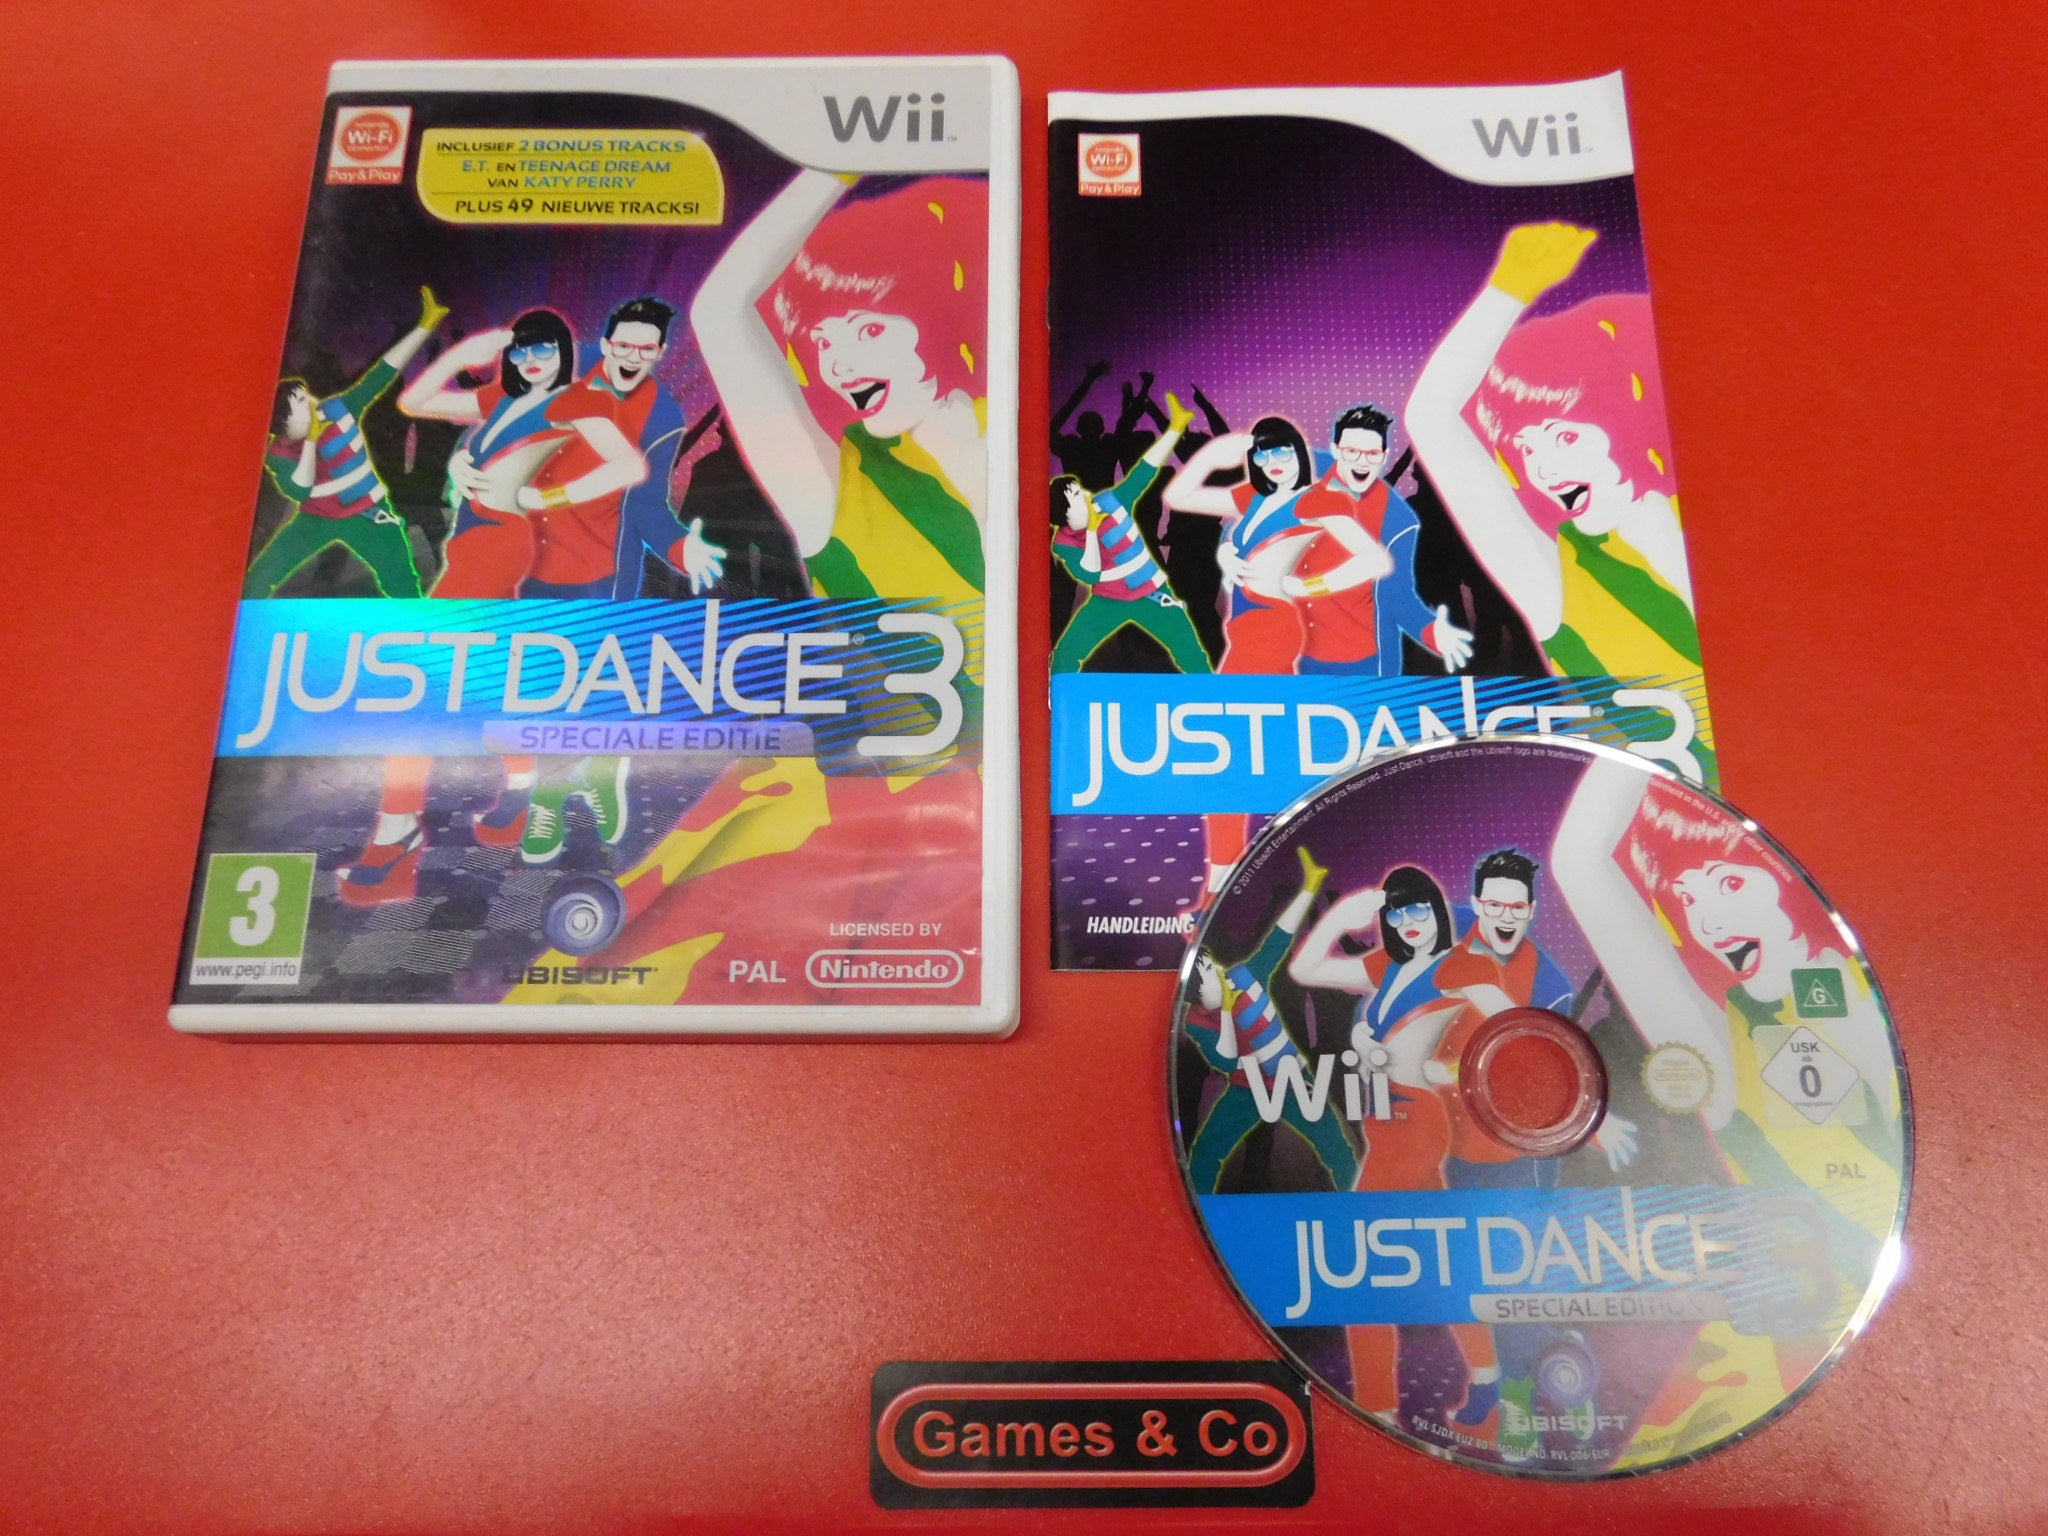 JUST DANCE 3 SPECIAL EDITION